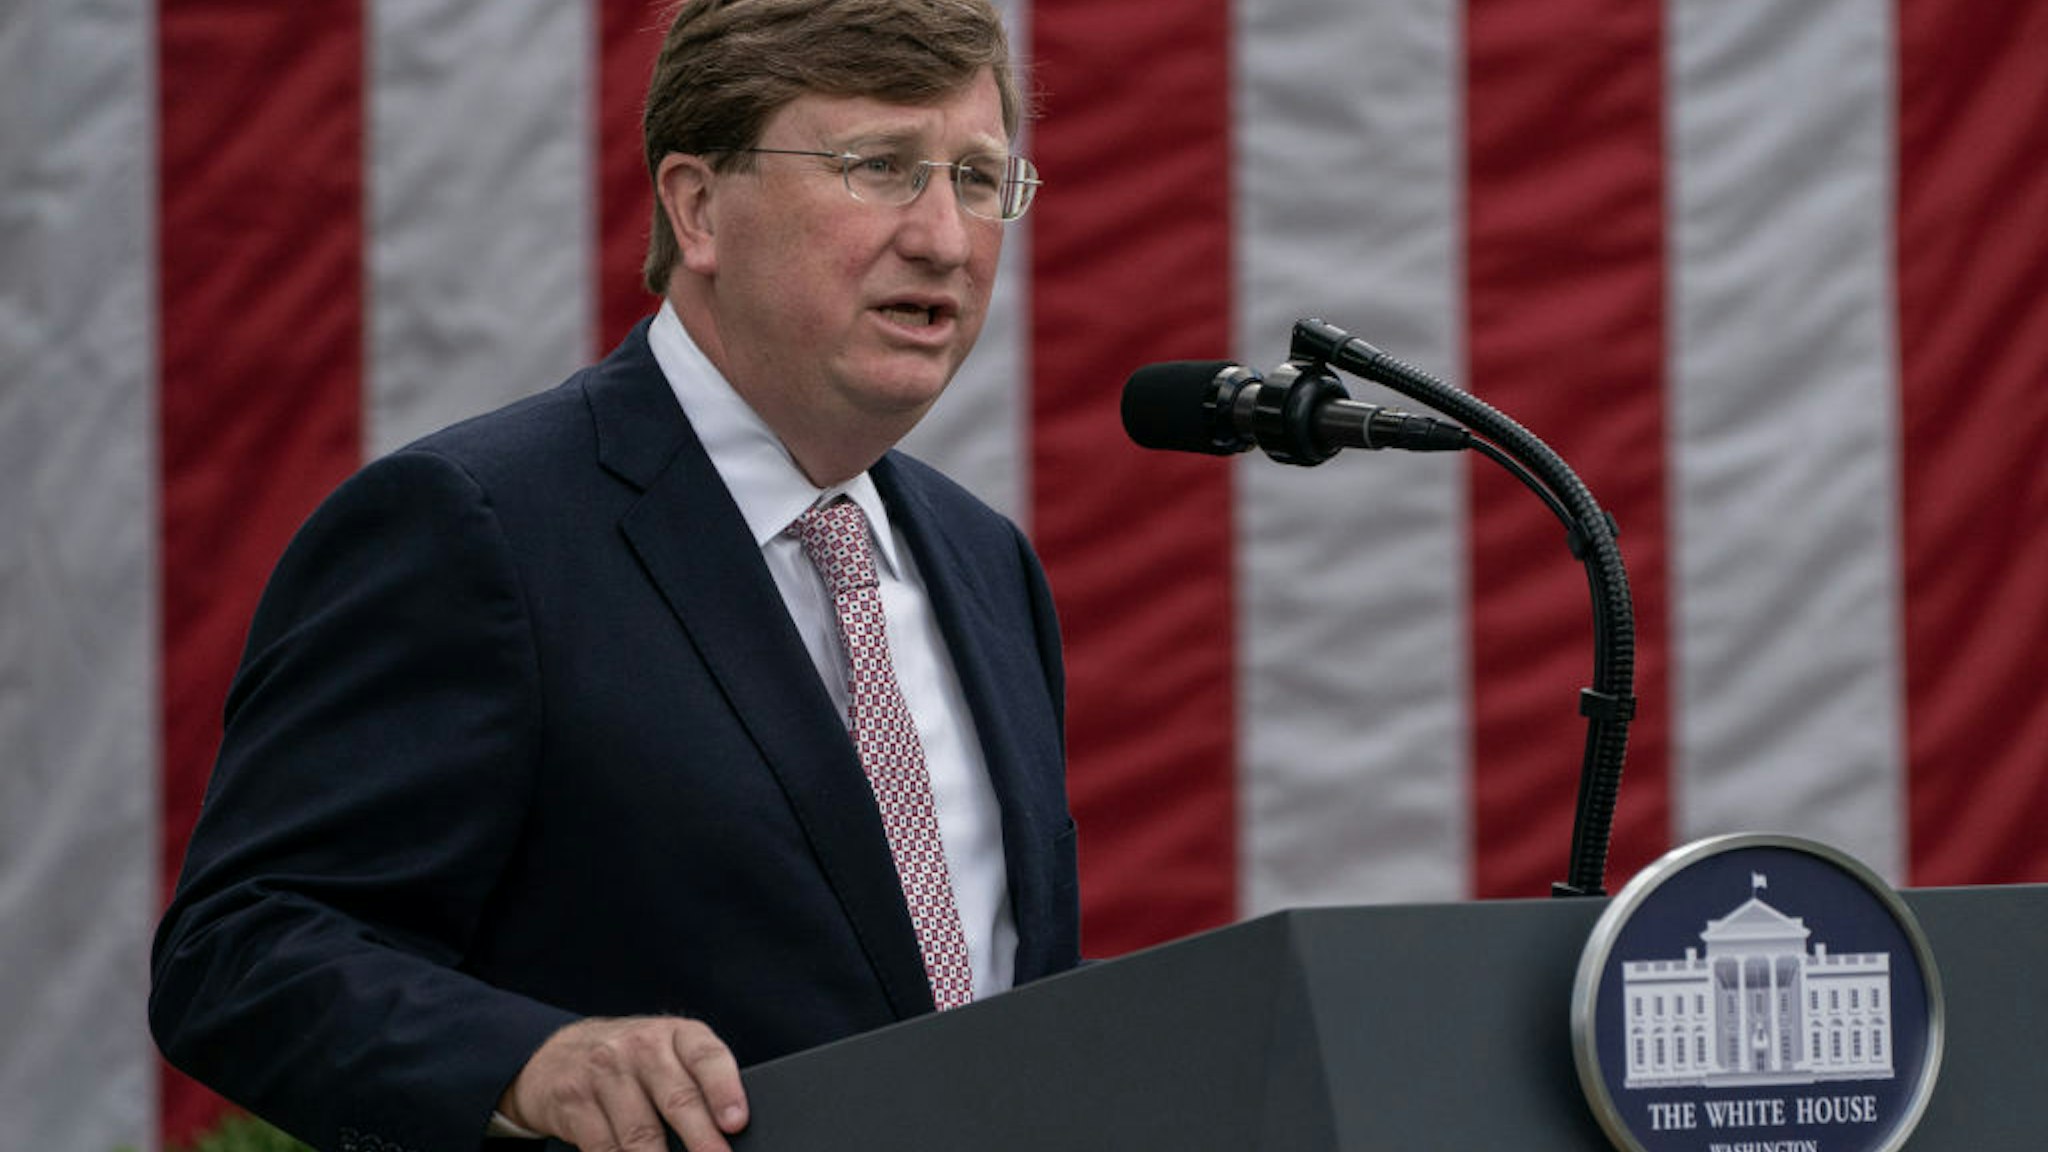 Tate Reeves, governor of Mississippi, speaks during an event in the Rose Garden of the White House in Washington, D.C., U.S., on Monday, Sept. 28, 2020. President Donald Trump is set to announce the government will send millions of rapid-result Covid-19 tests to states, and urge that they be used in schools. Photographer: Ken Cedeno/Sipa/Bloomberg via Getty Images